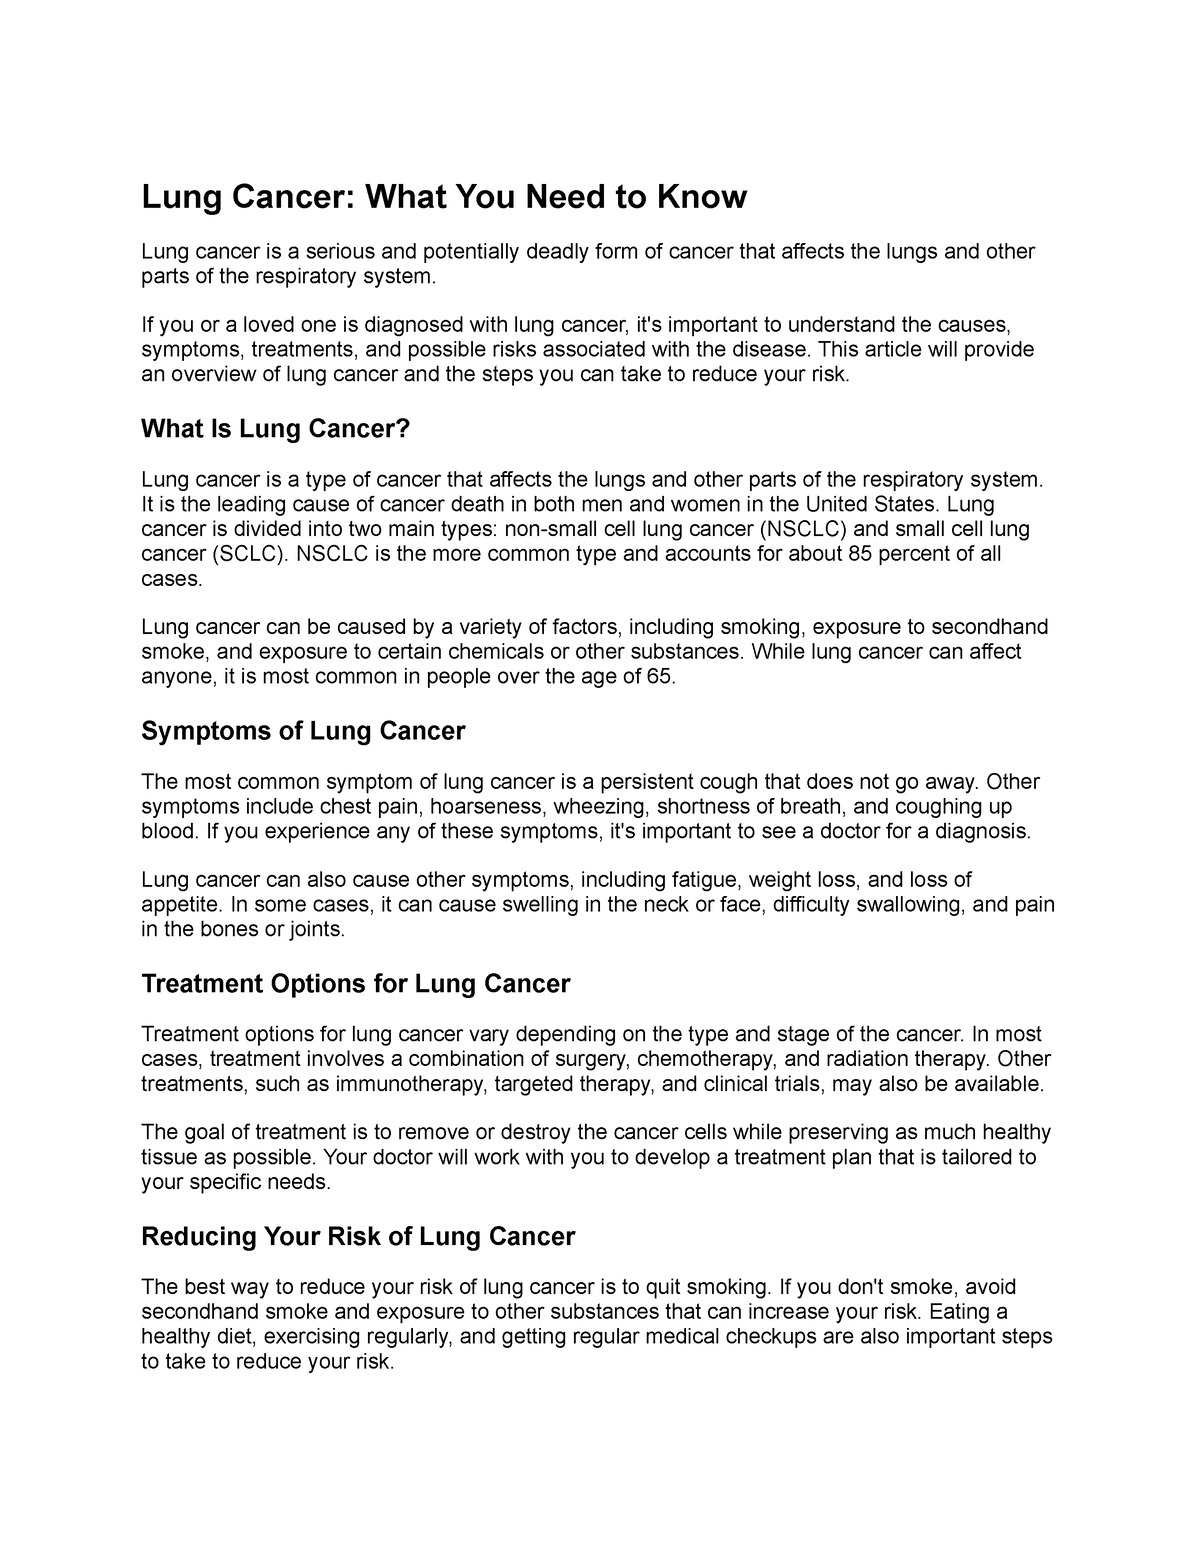 lung cancer essay conclusion